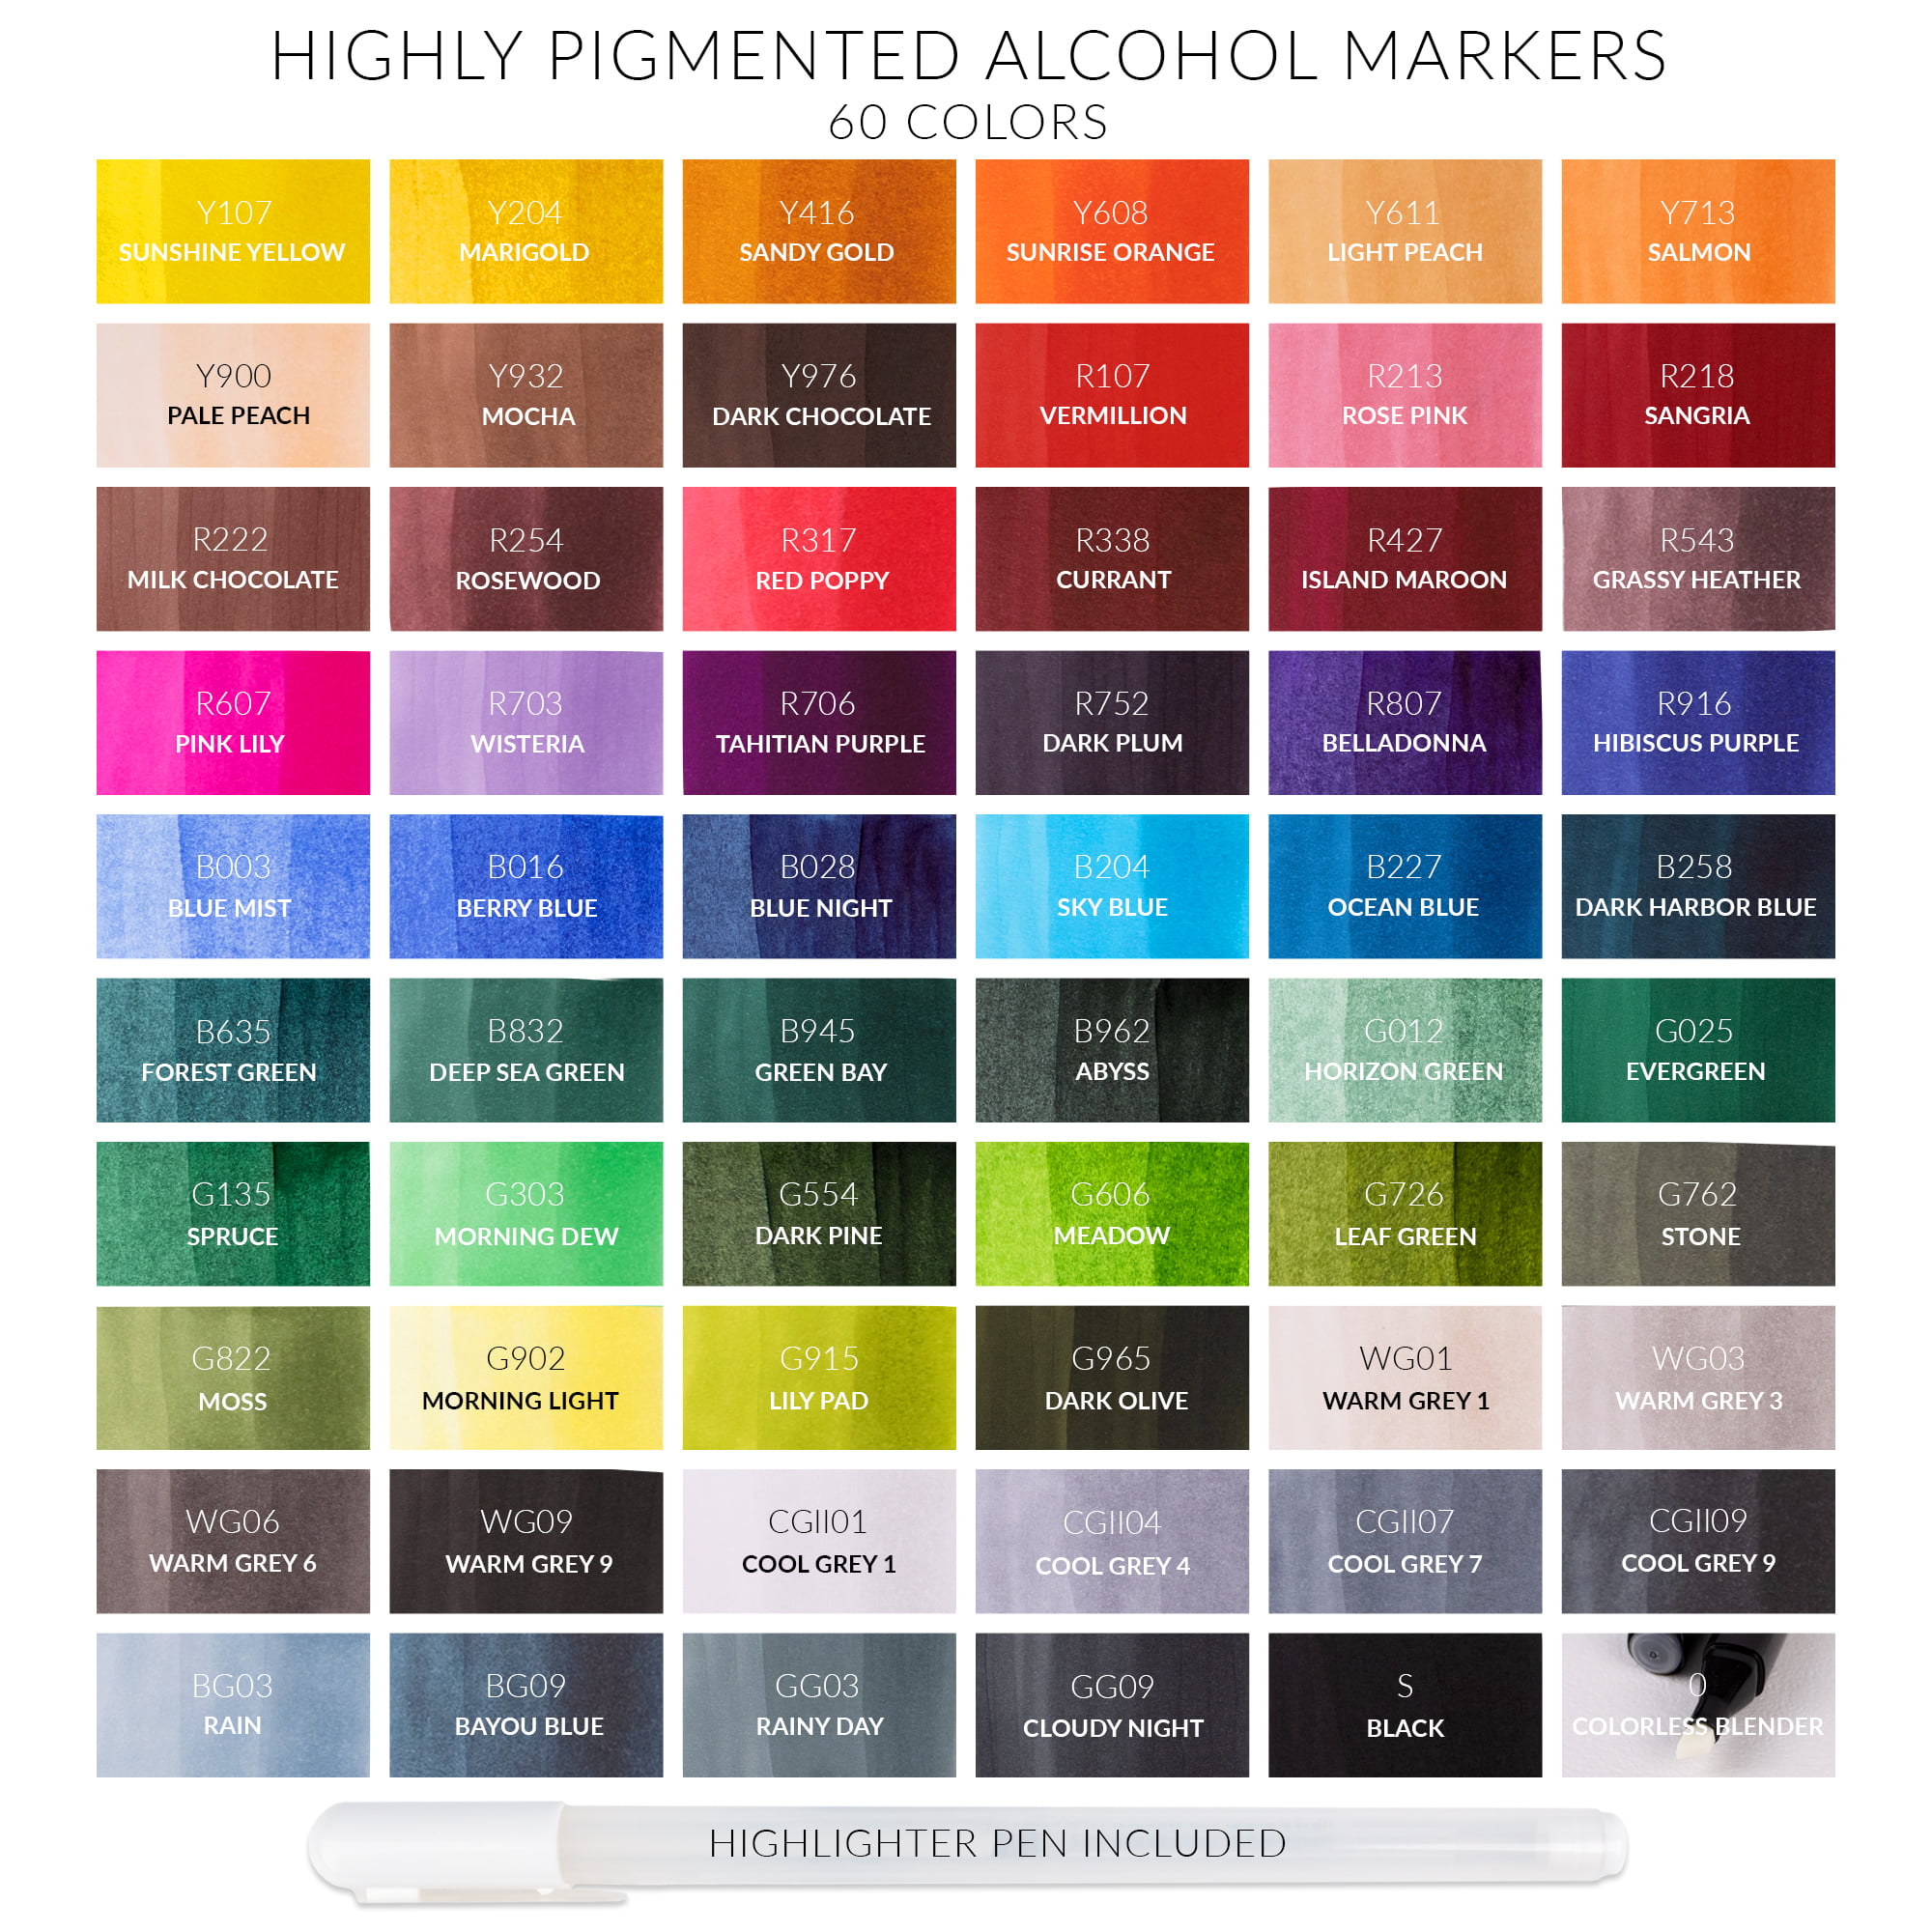 WA Portman Prima Professional Alcohol Markers Set - 60-pc Chisel and Fine  Point Dual Tip Alcohol Markers - Alcohol Marker Set - Alcohol Ink Markers